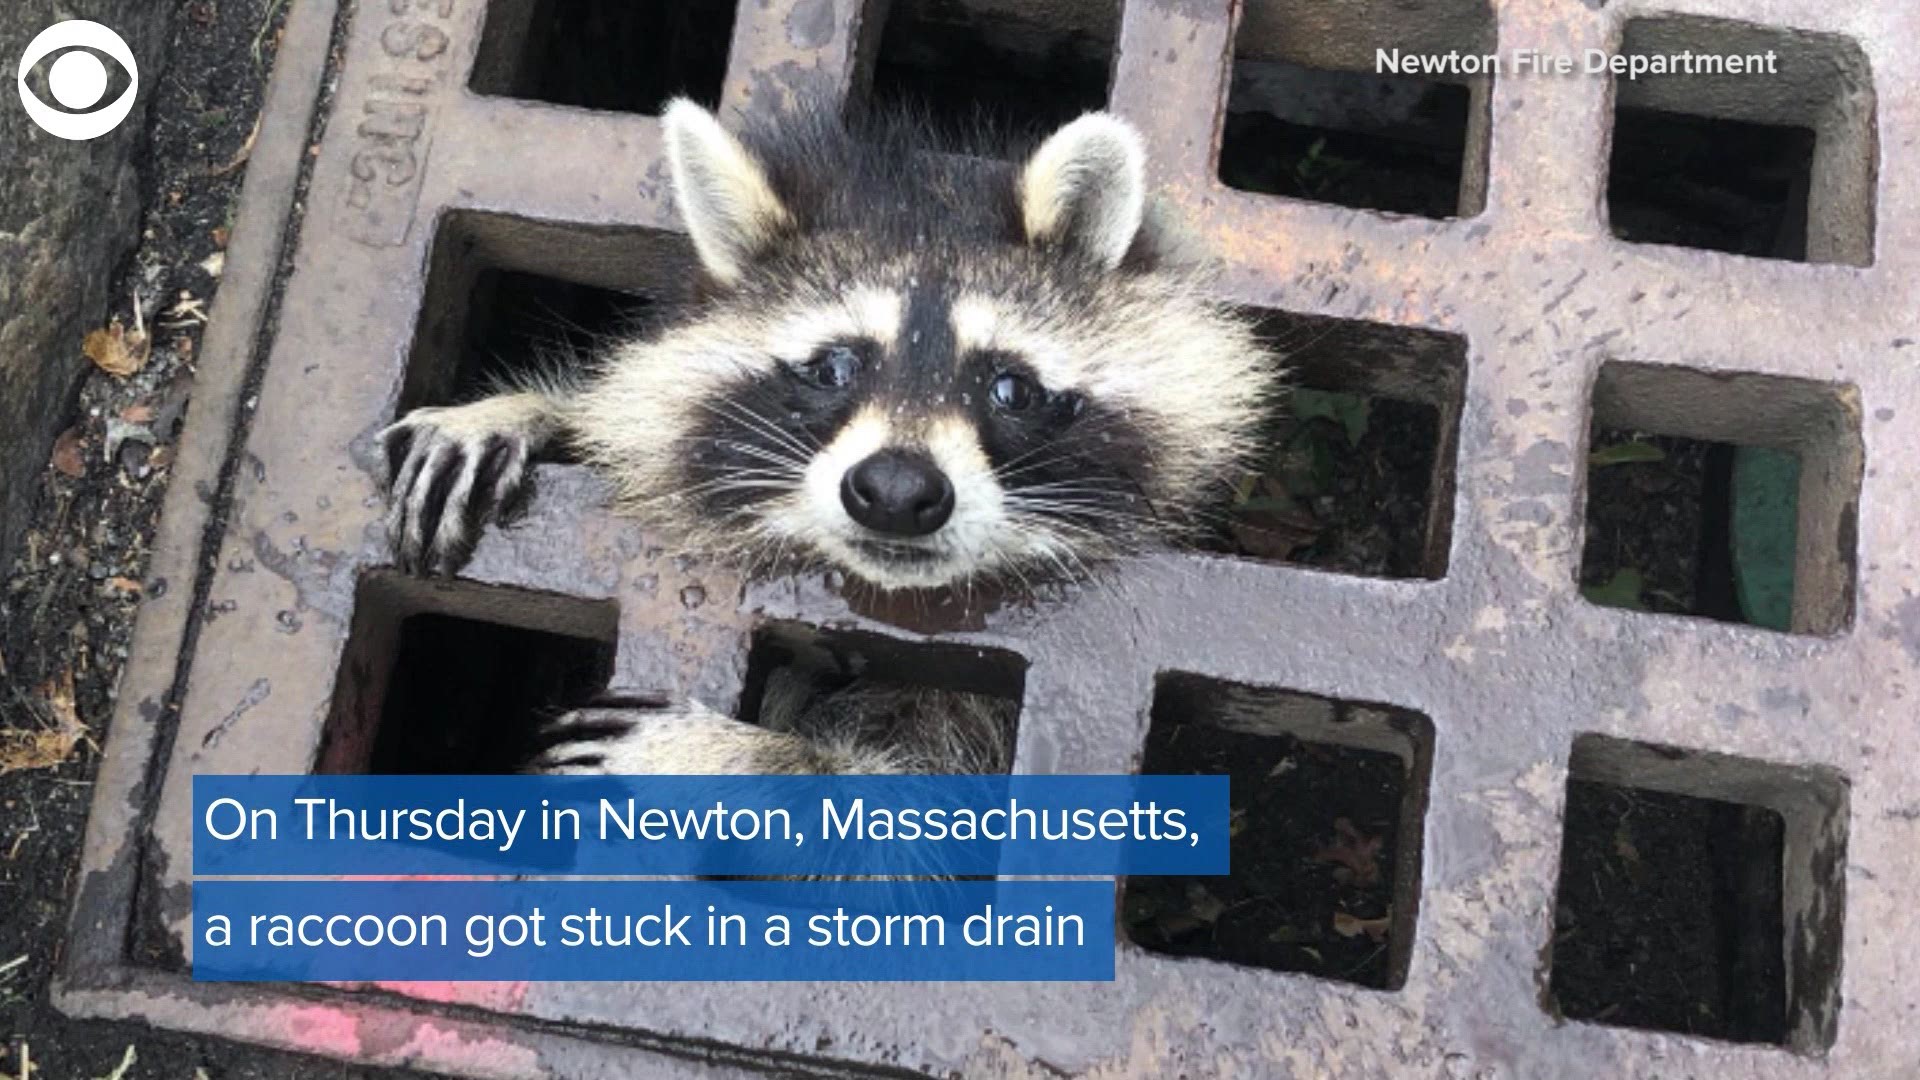 A raccoon found himself stuck in a storm drain on Thursday in Newton, Massachusetts. Firefighters and animal control came to his rescue.